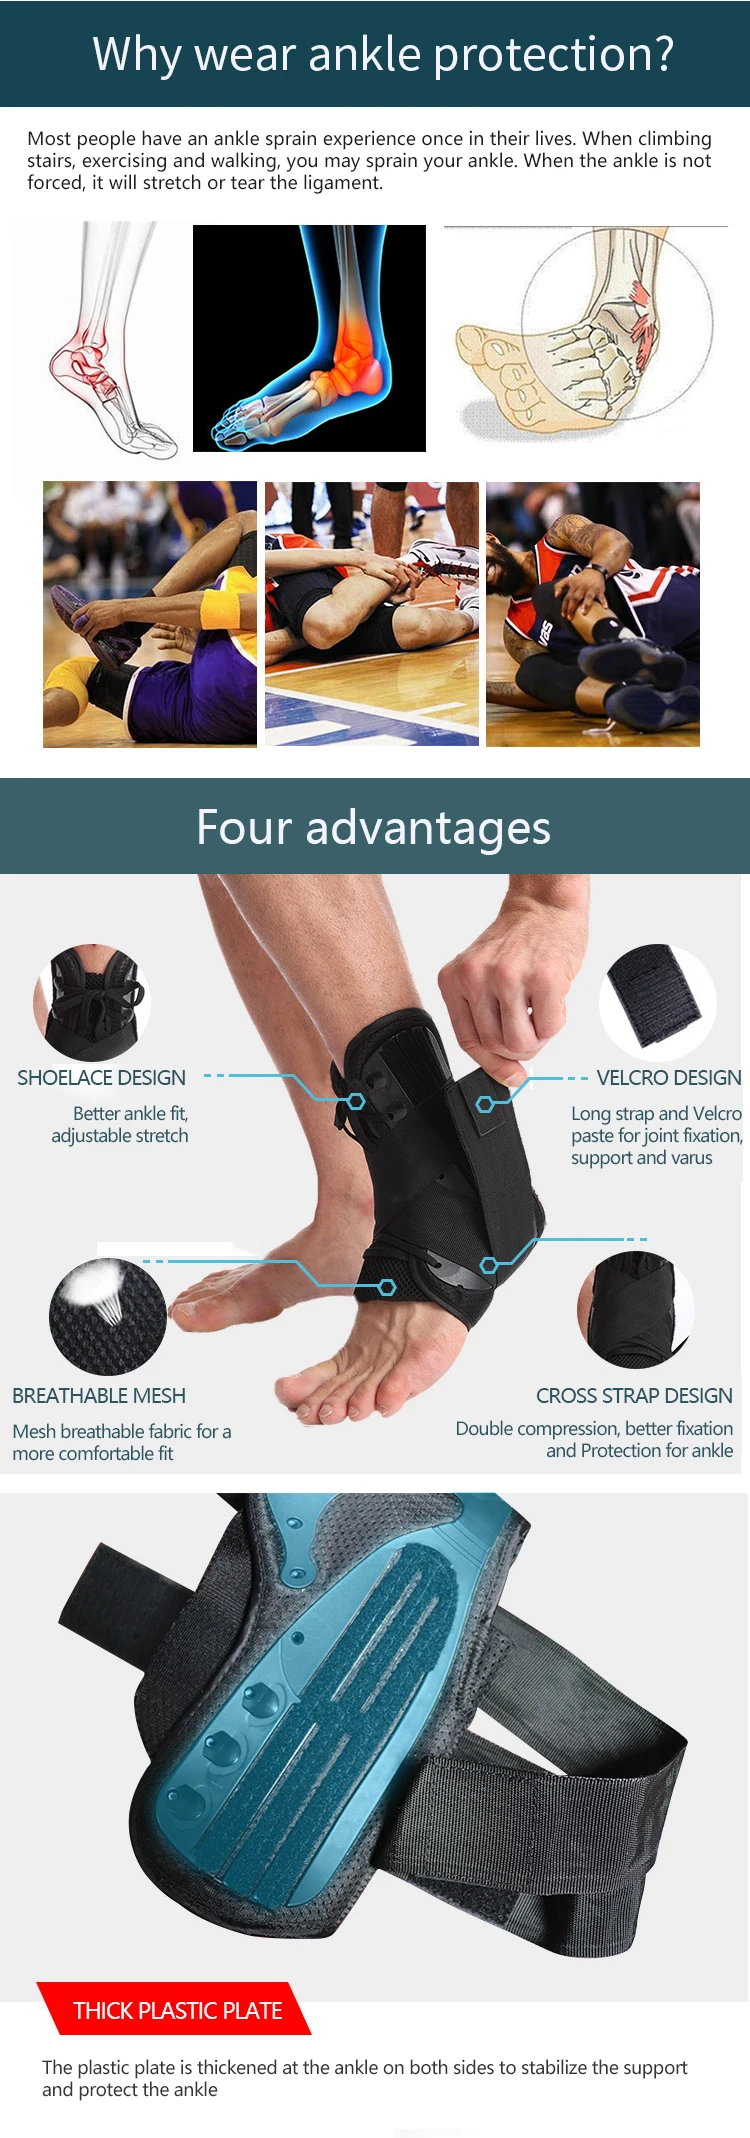 Enerup Black Recovery Tourmaline Metal Leg Lace Up Sport Ankle Support Brace Stailizer